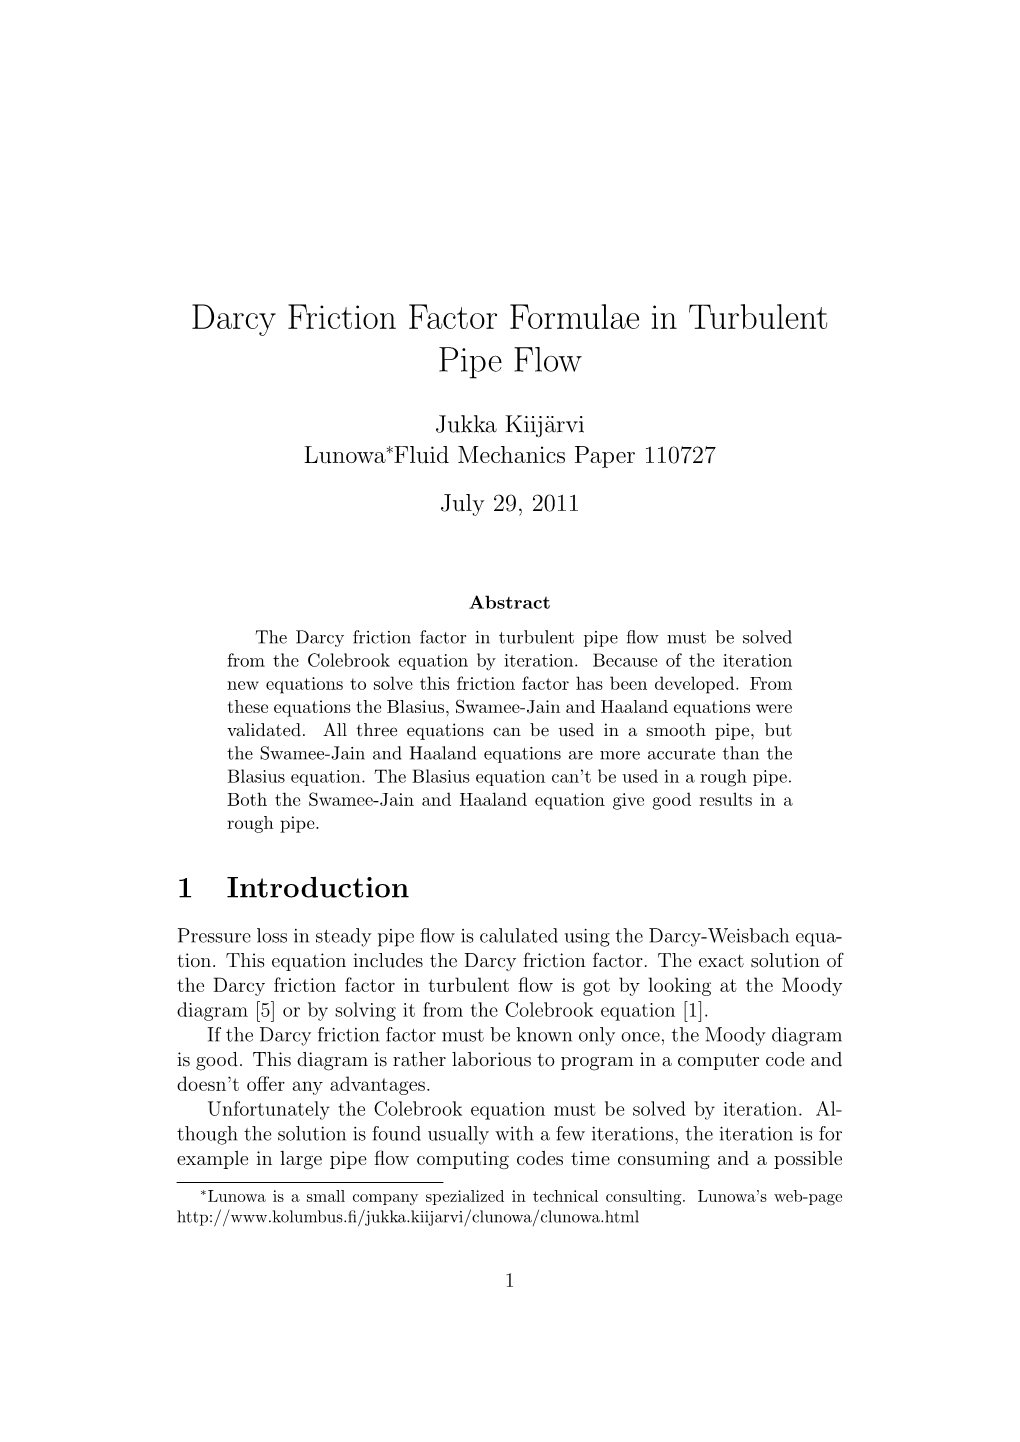 Darcy Friction Factor Formulae in Turbulent Pipe Flow